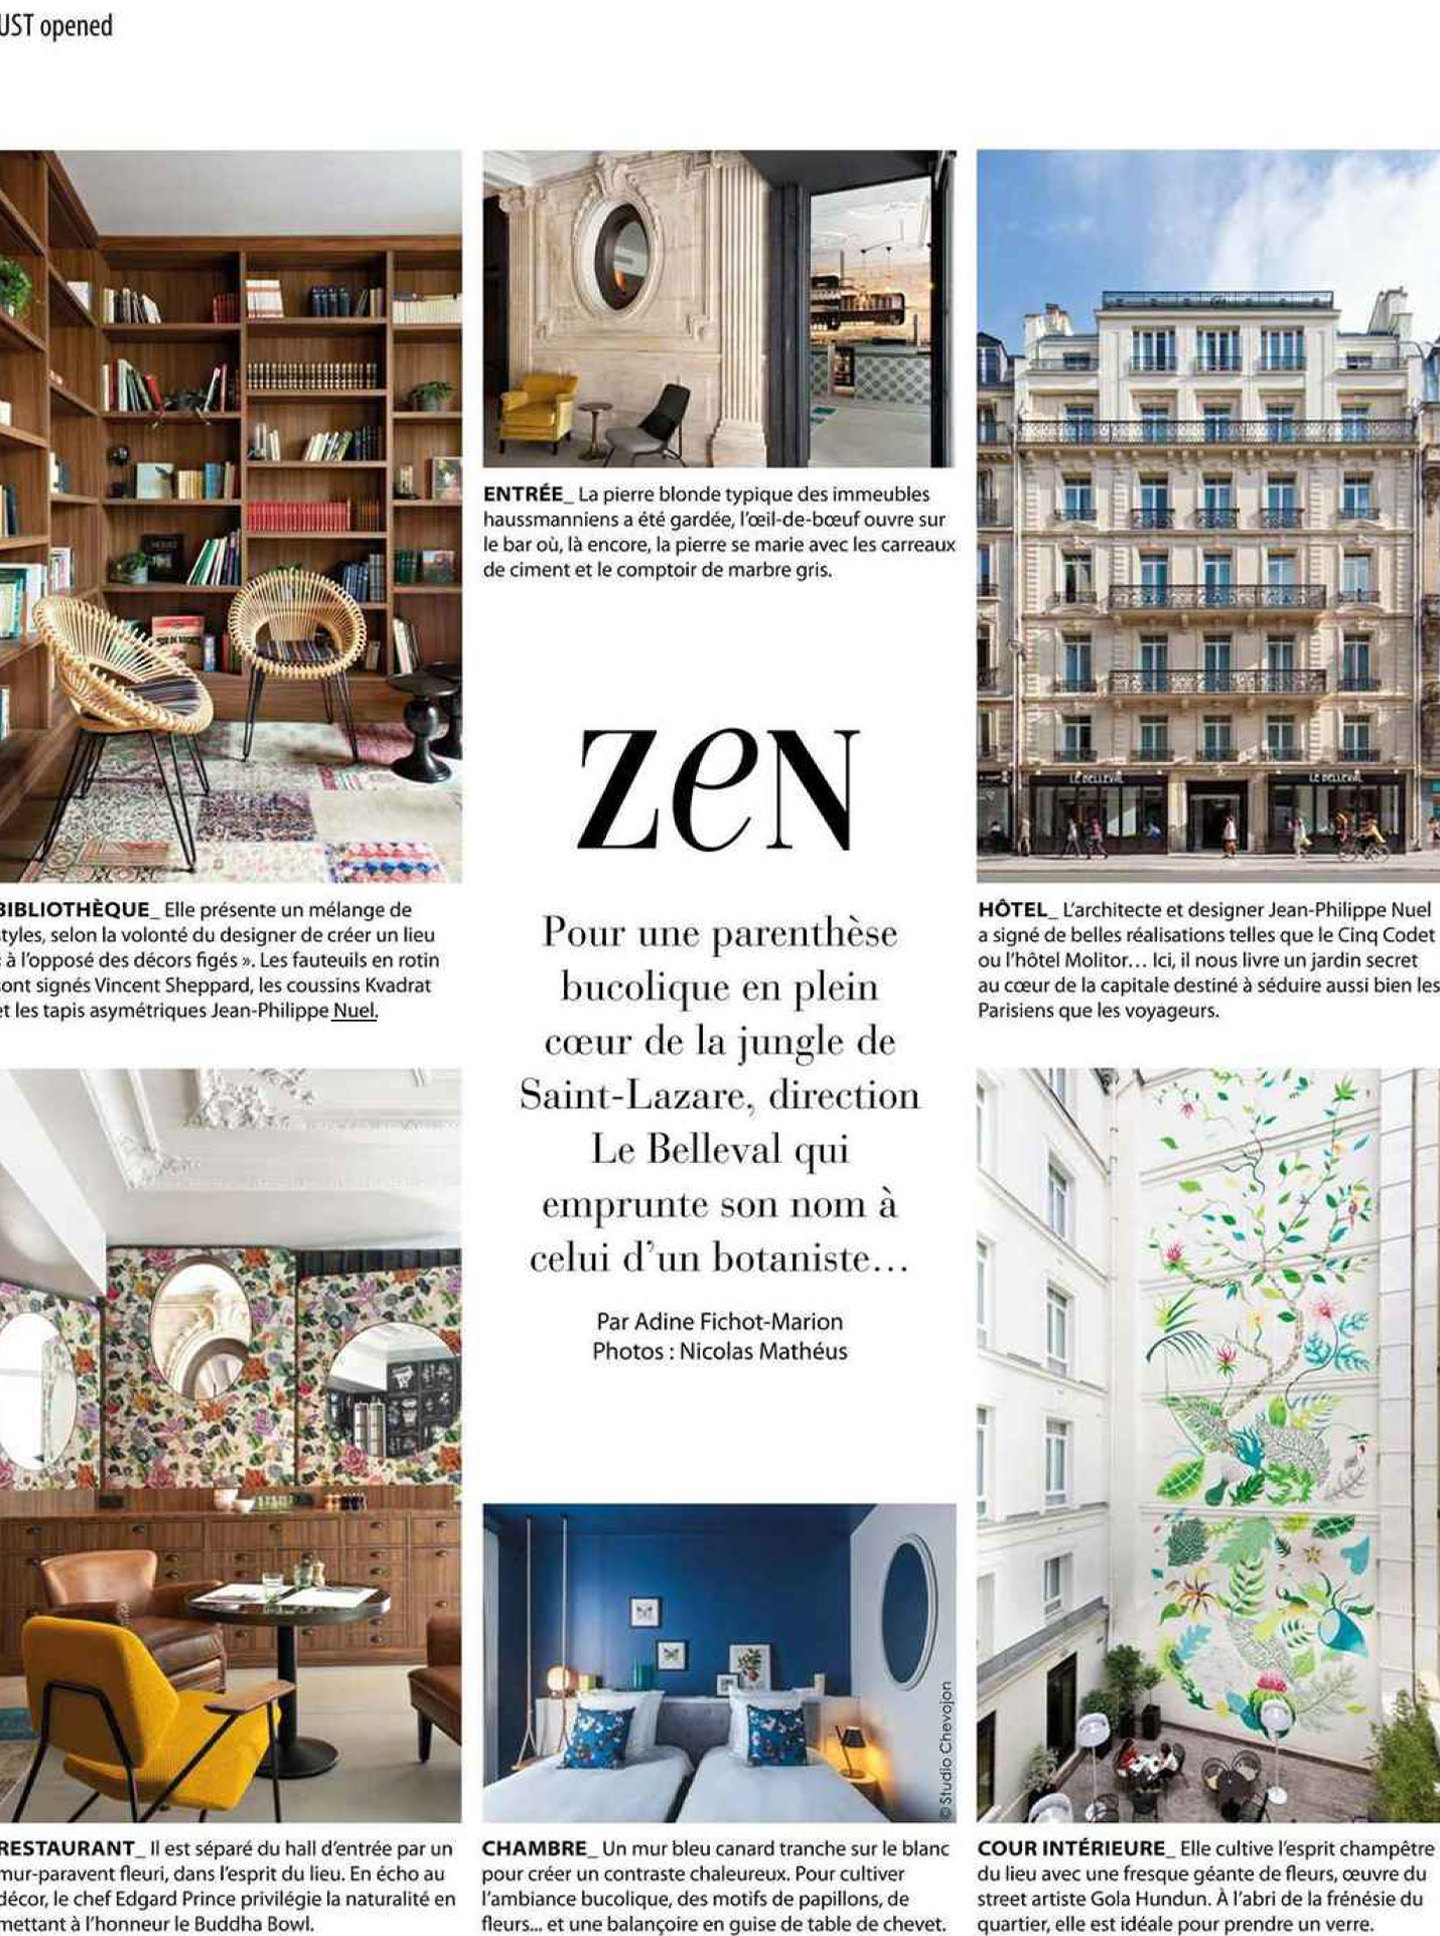 Article on the belleval by jean-Philippe Nuel studio in the magazine voyage de luxe, new lifestyle hotel, luxury interior design, paris center, french luxury hotel